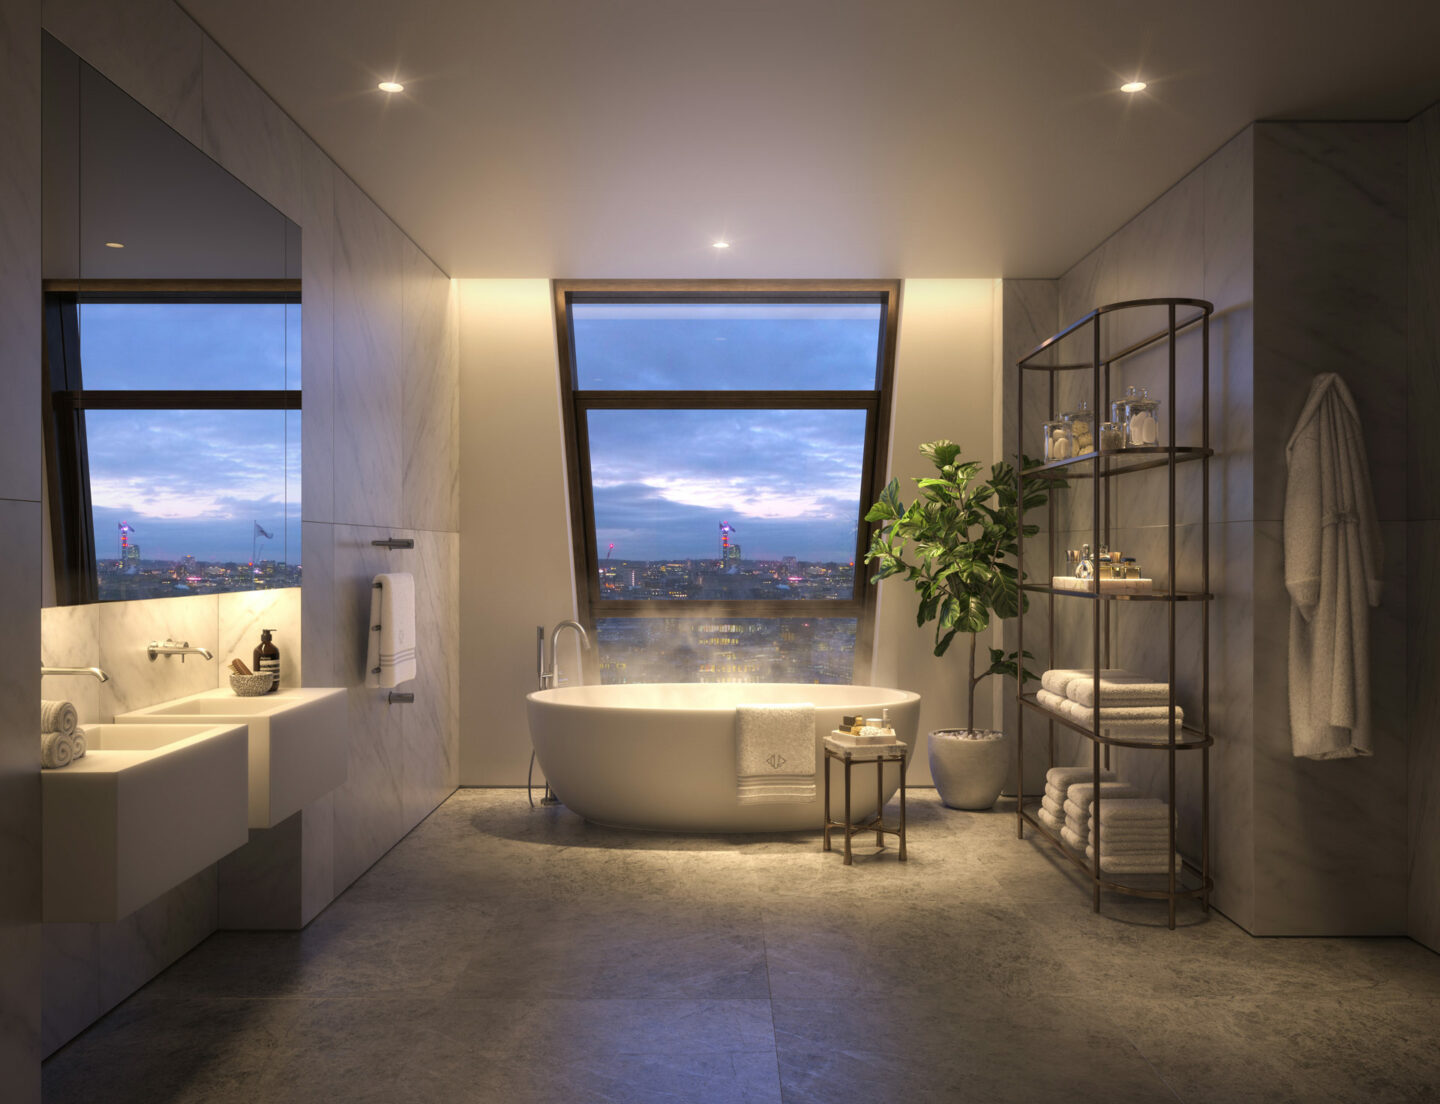 Penthouse bathroom at Orchard Place